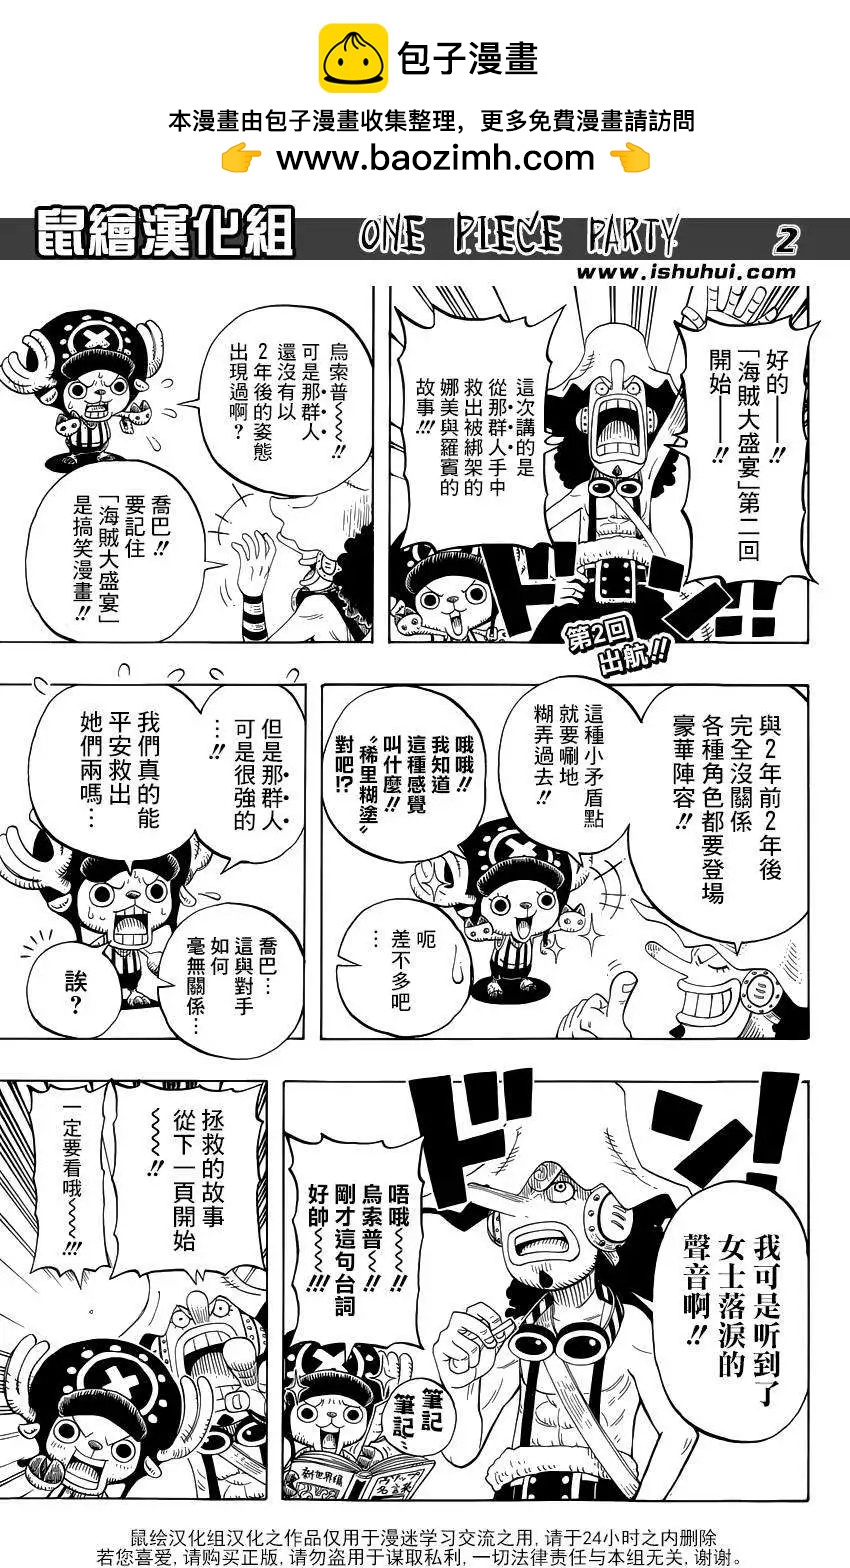 One piece party - 第02回 - 2